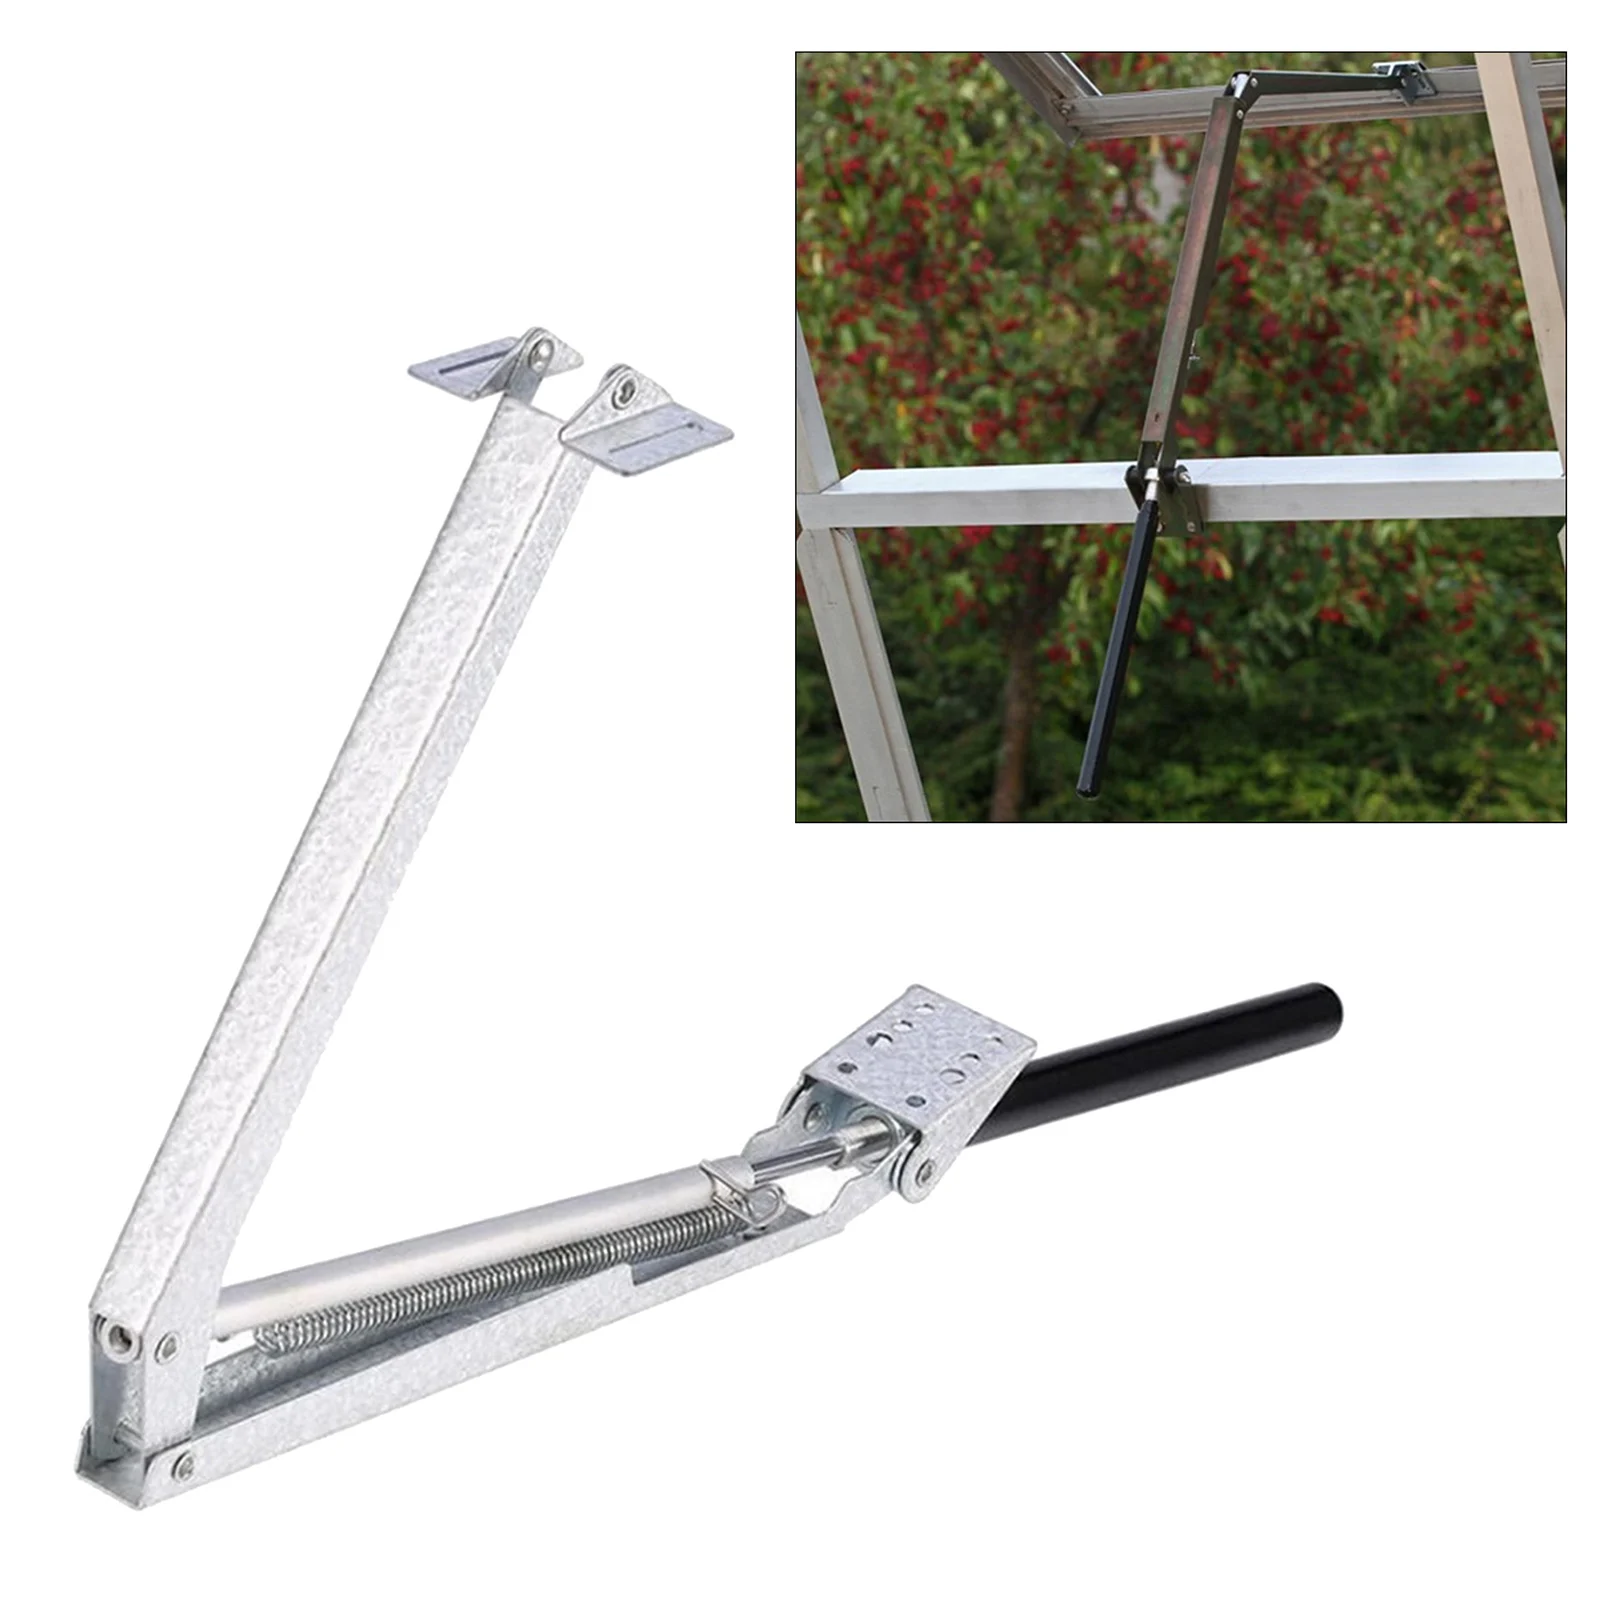 Greenhouse Automatic Window Opener Solar Sensing Vent Sping Opener Load 7kg